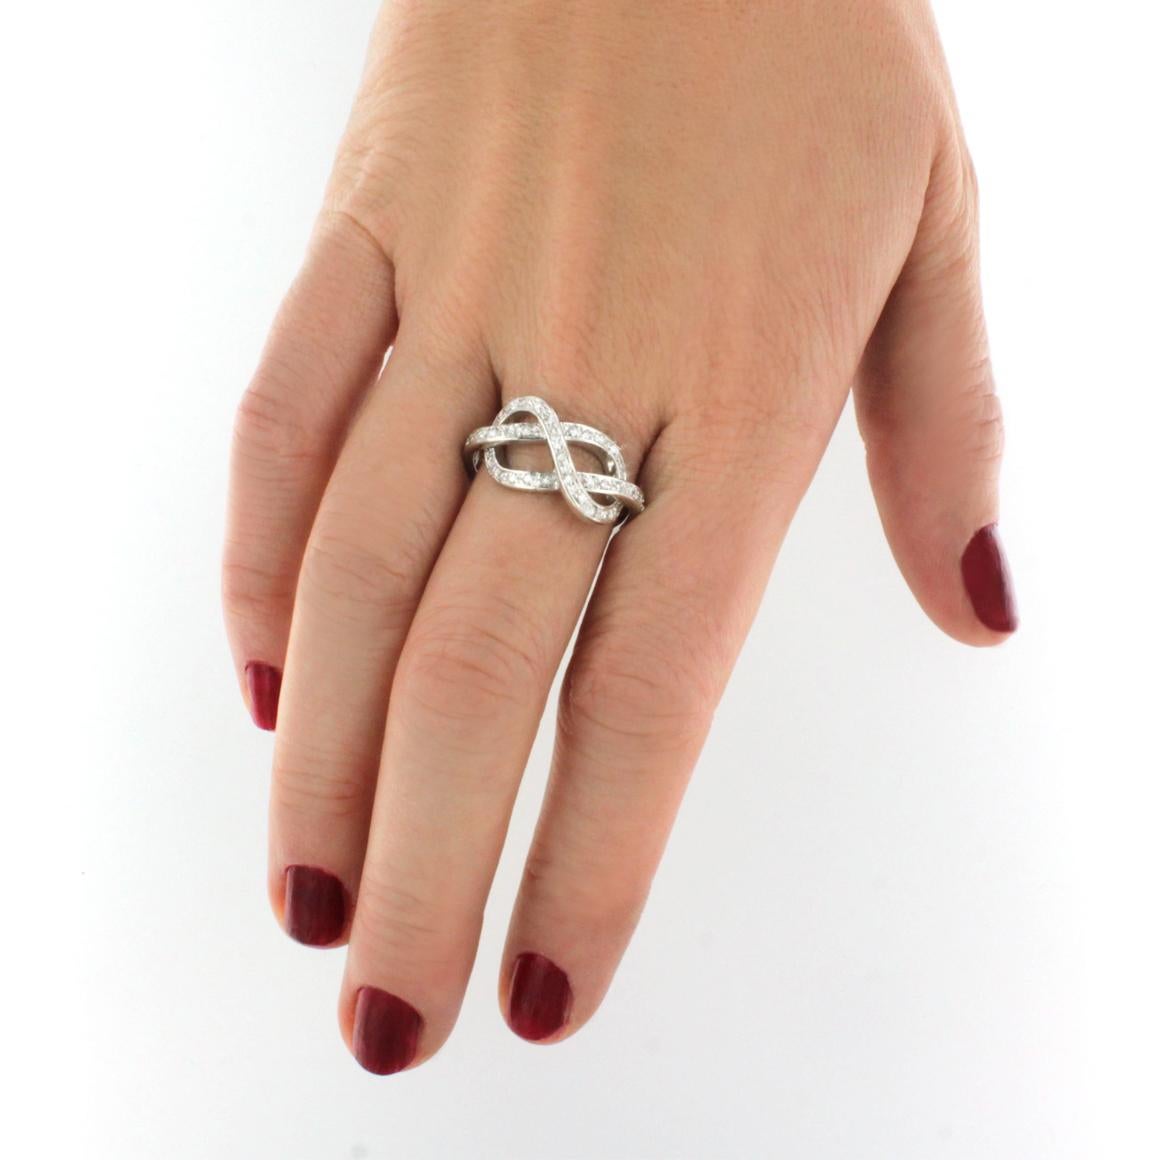 Intertwining of love.  It's a love knot . Timeless ring with white diamonds.
Ring in 18k white gold with white Diamonds cts 0.18 VS colour G/H. 

Size of ring:  15 EU -  8 USA 

All Stanoppi Jewelry is new and has never been previously owned or